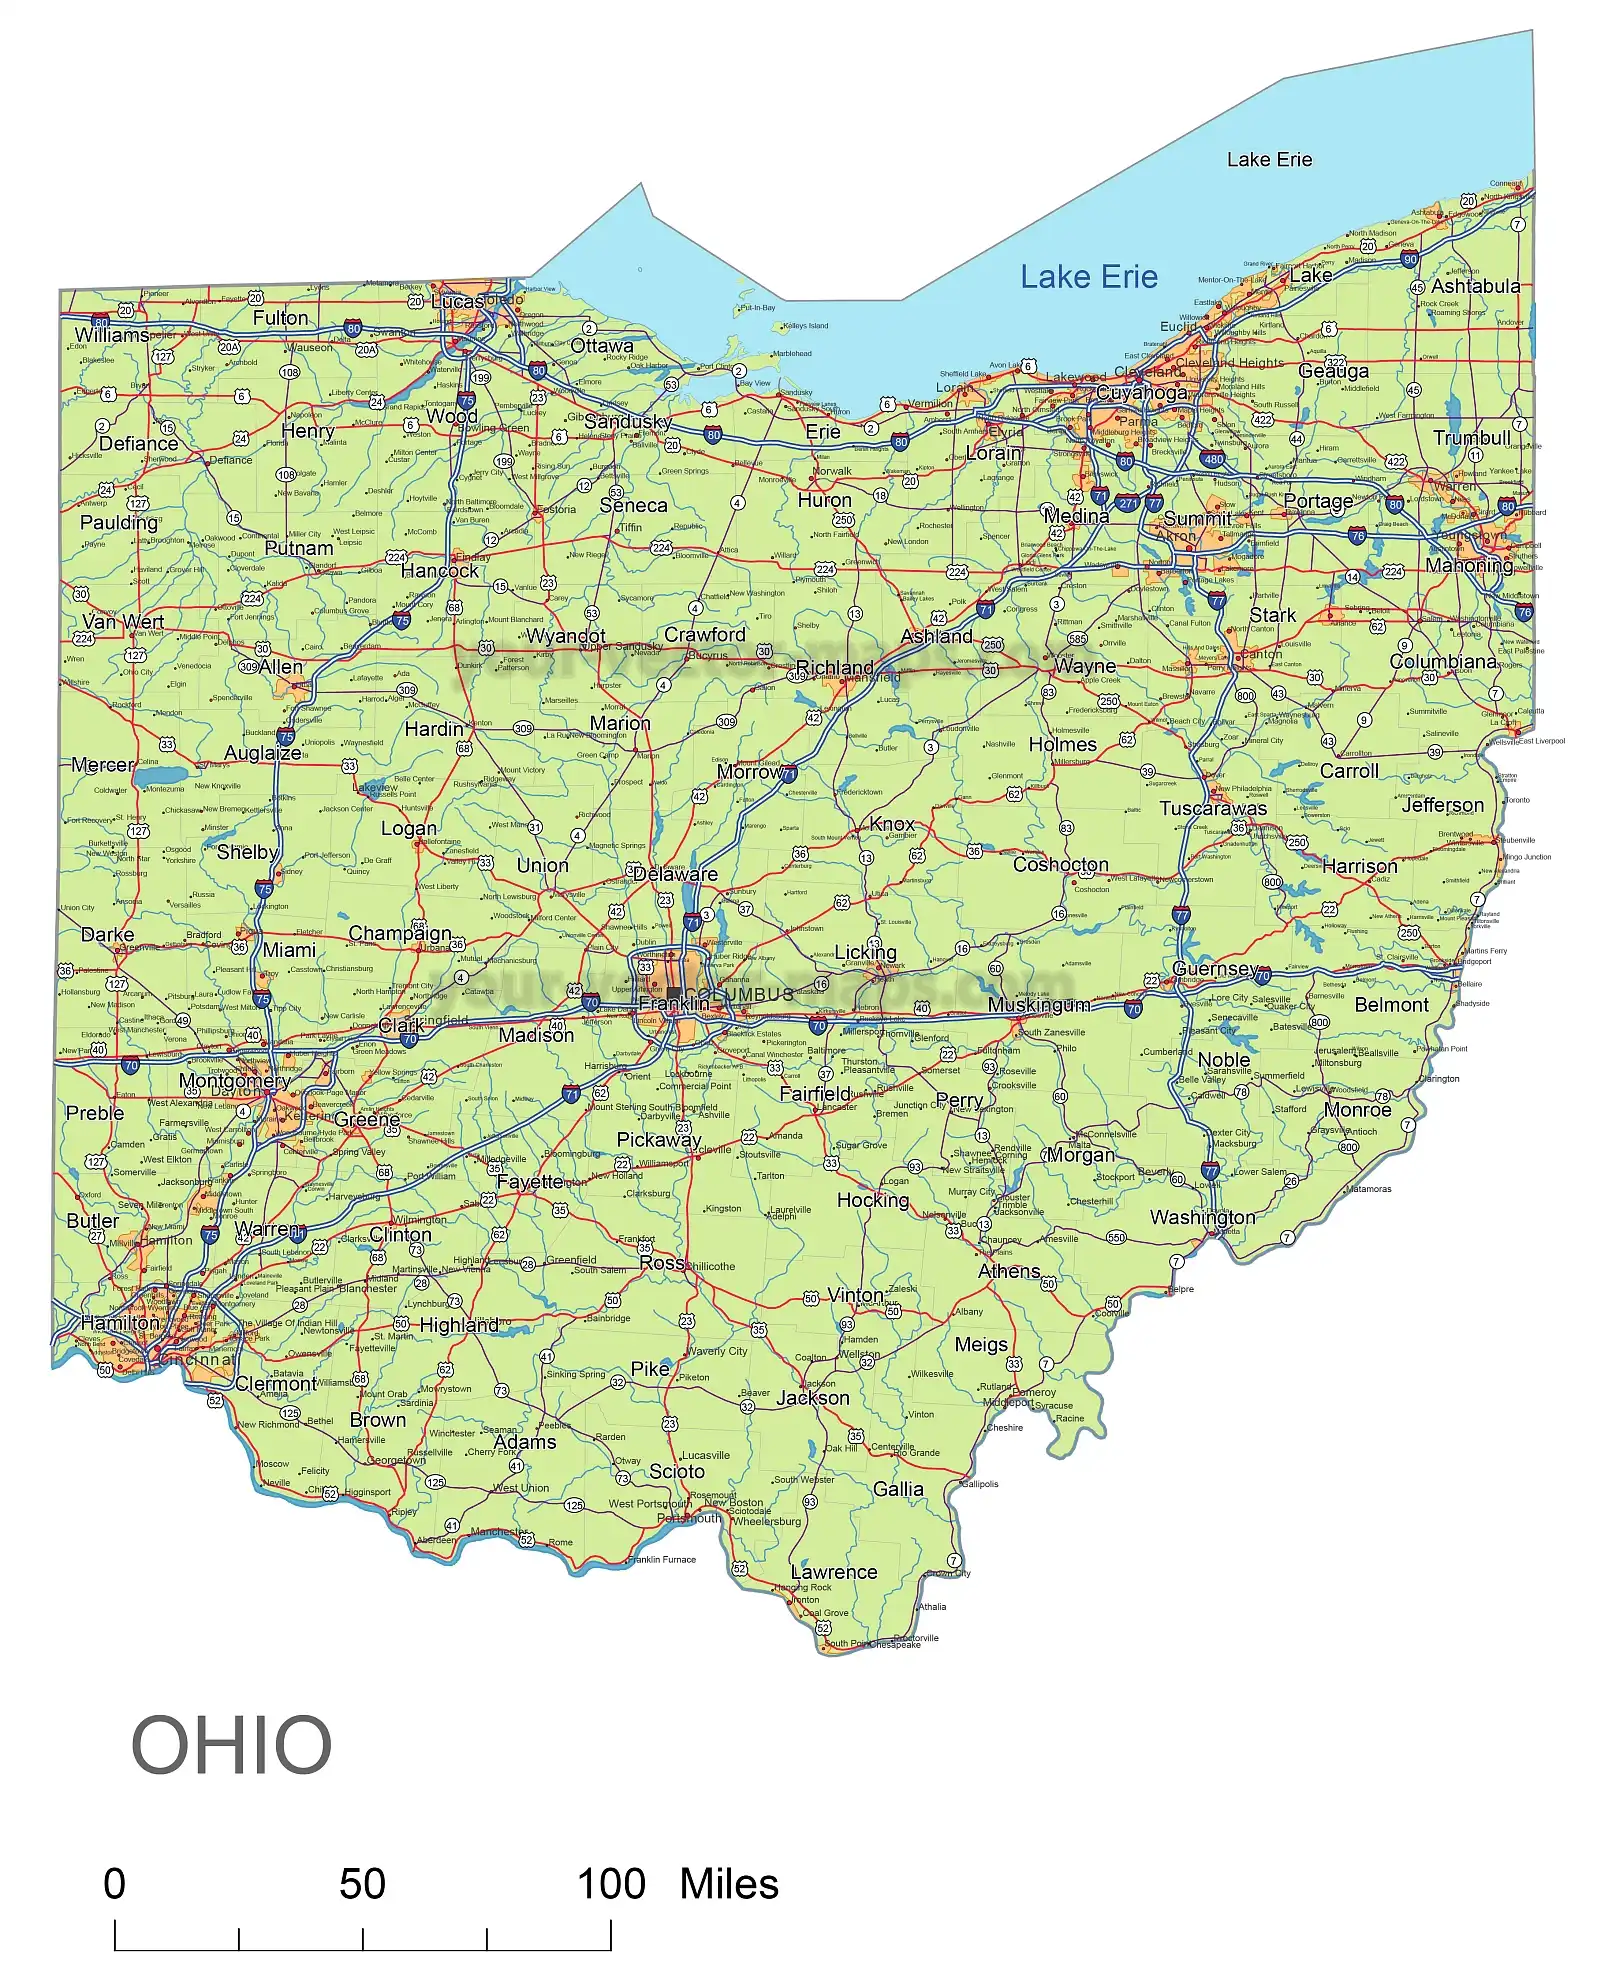 Your-Vector-Maps.com Files of Ohio State vector road map.